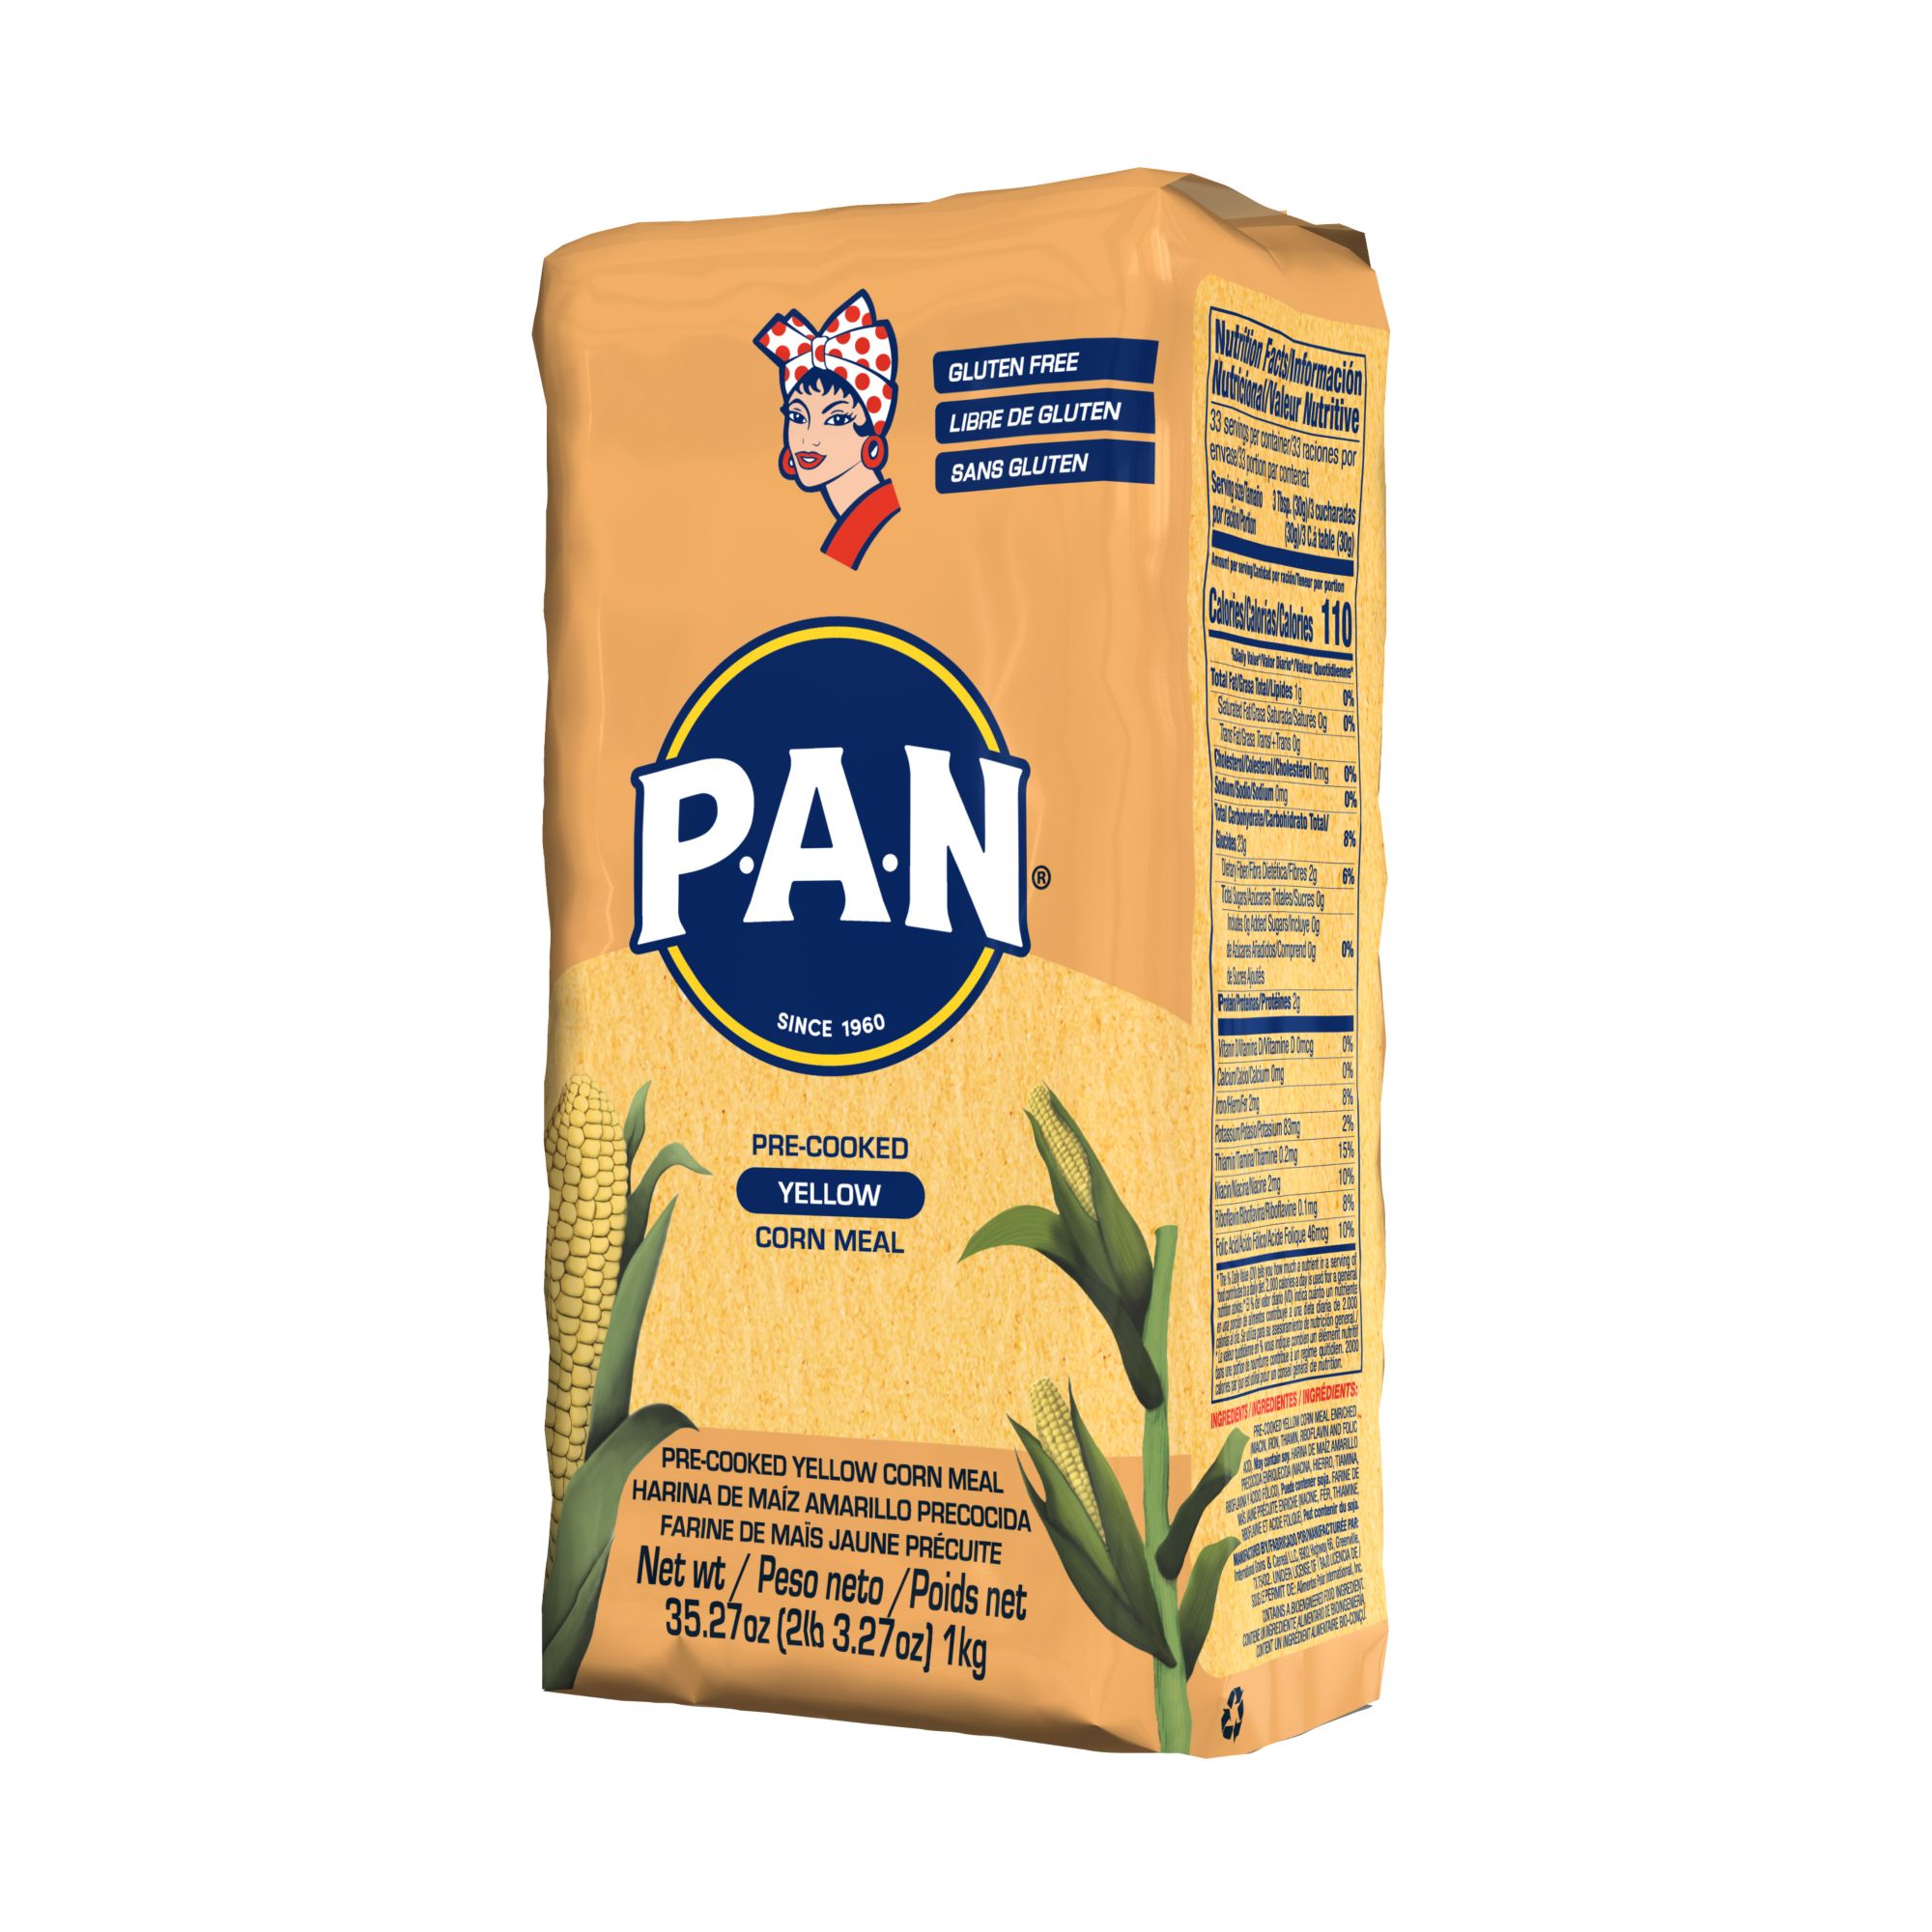 P.A.N. Pre-cooked Yellow Corn Meal, 5 lbs.